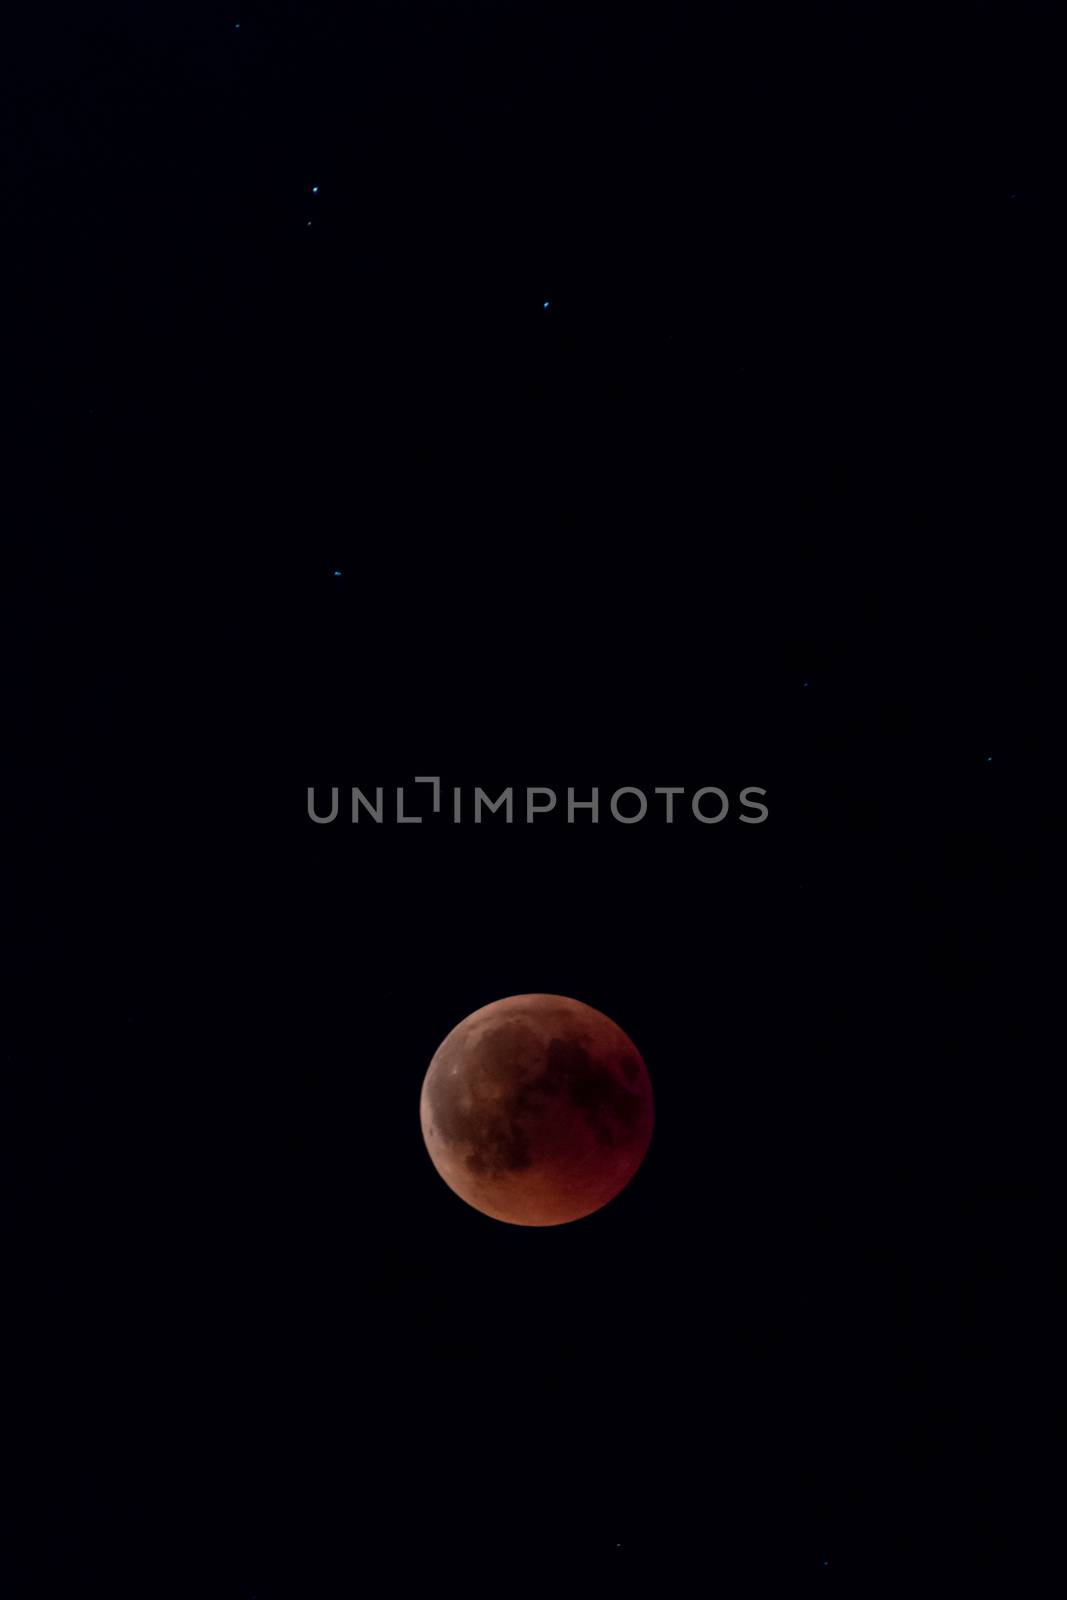 Blood moon at most red moment in black night sky by MXW_Stock